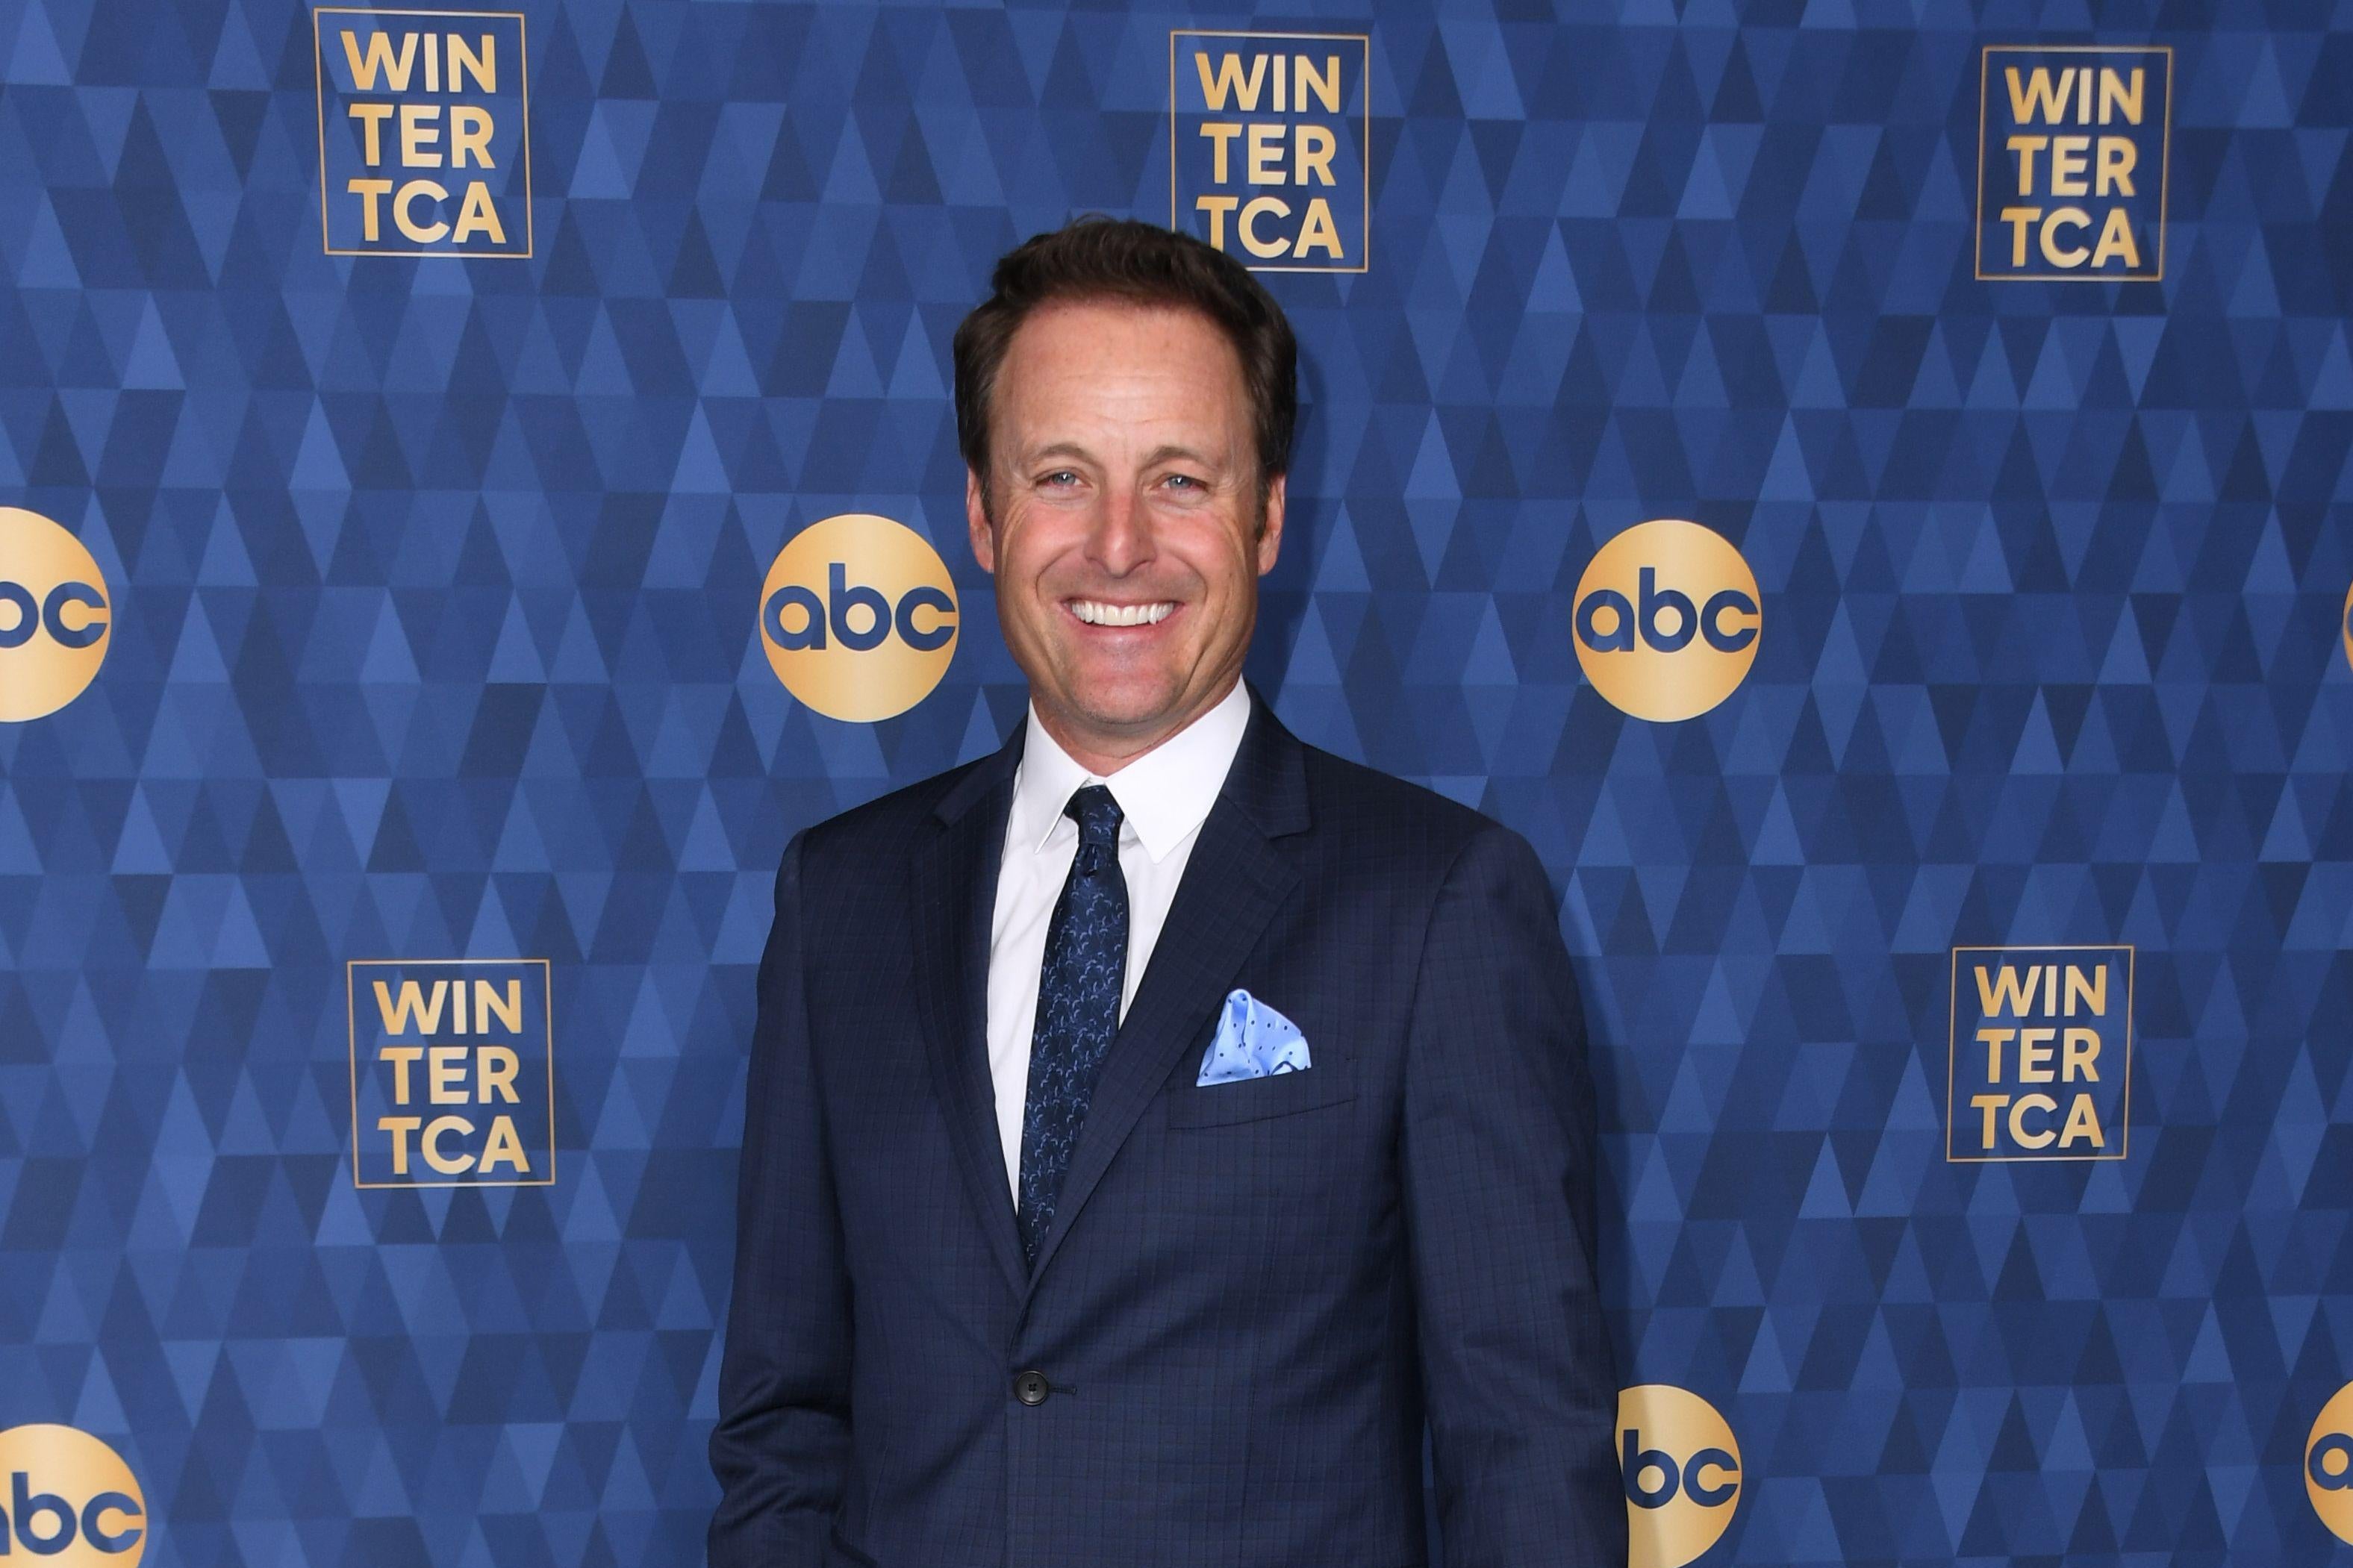 Chris Harrison in a suit standing in front of an ABC step and repeat.